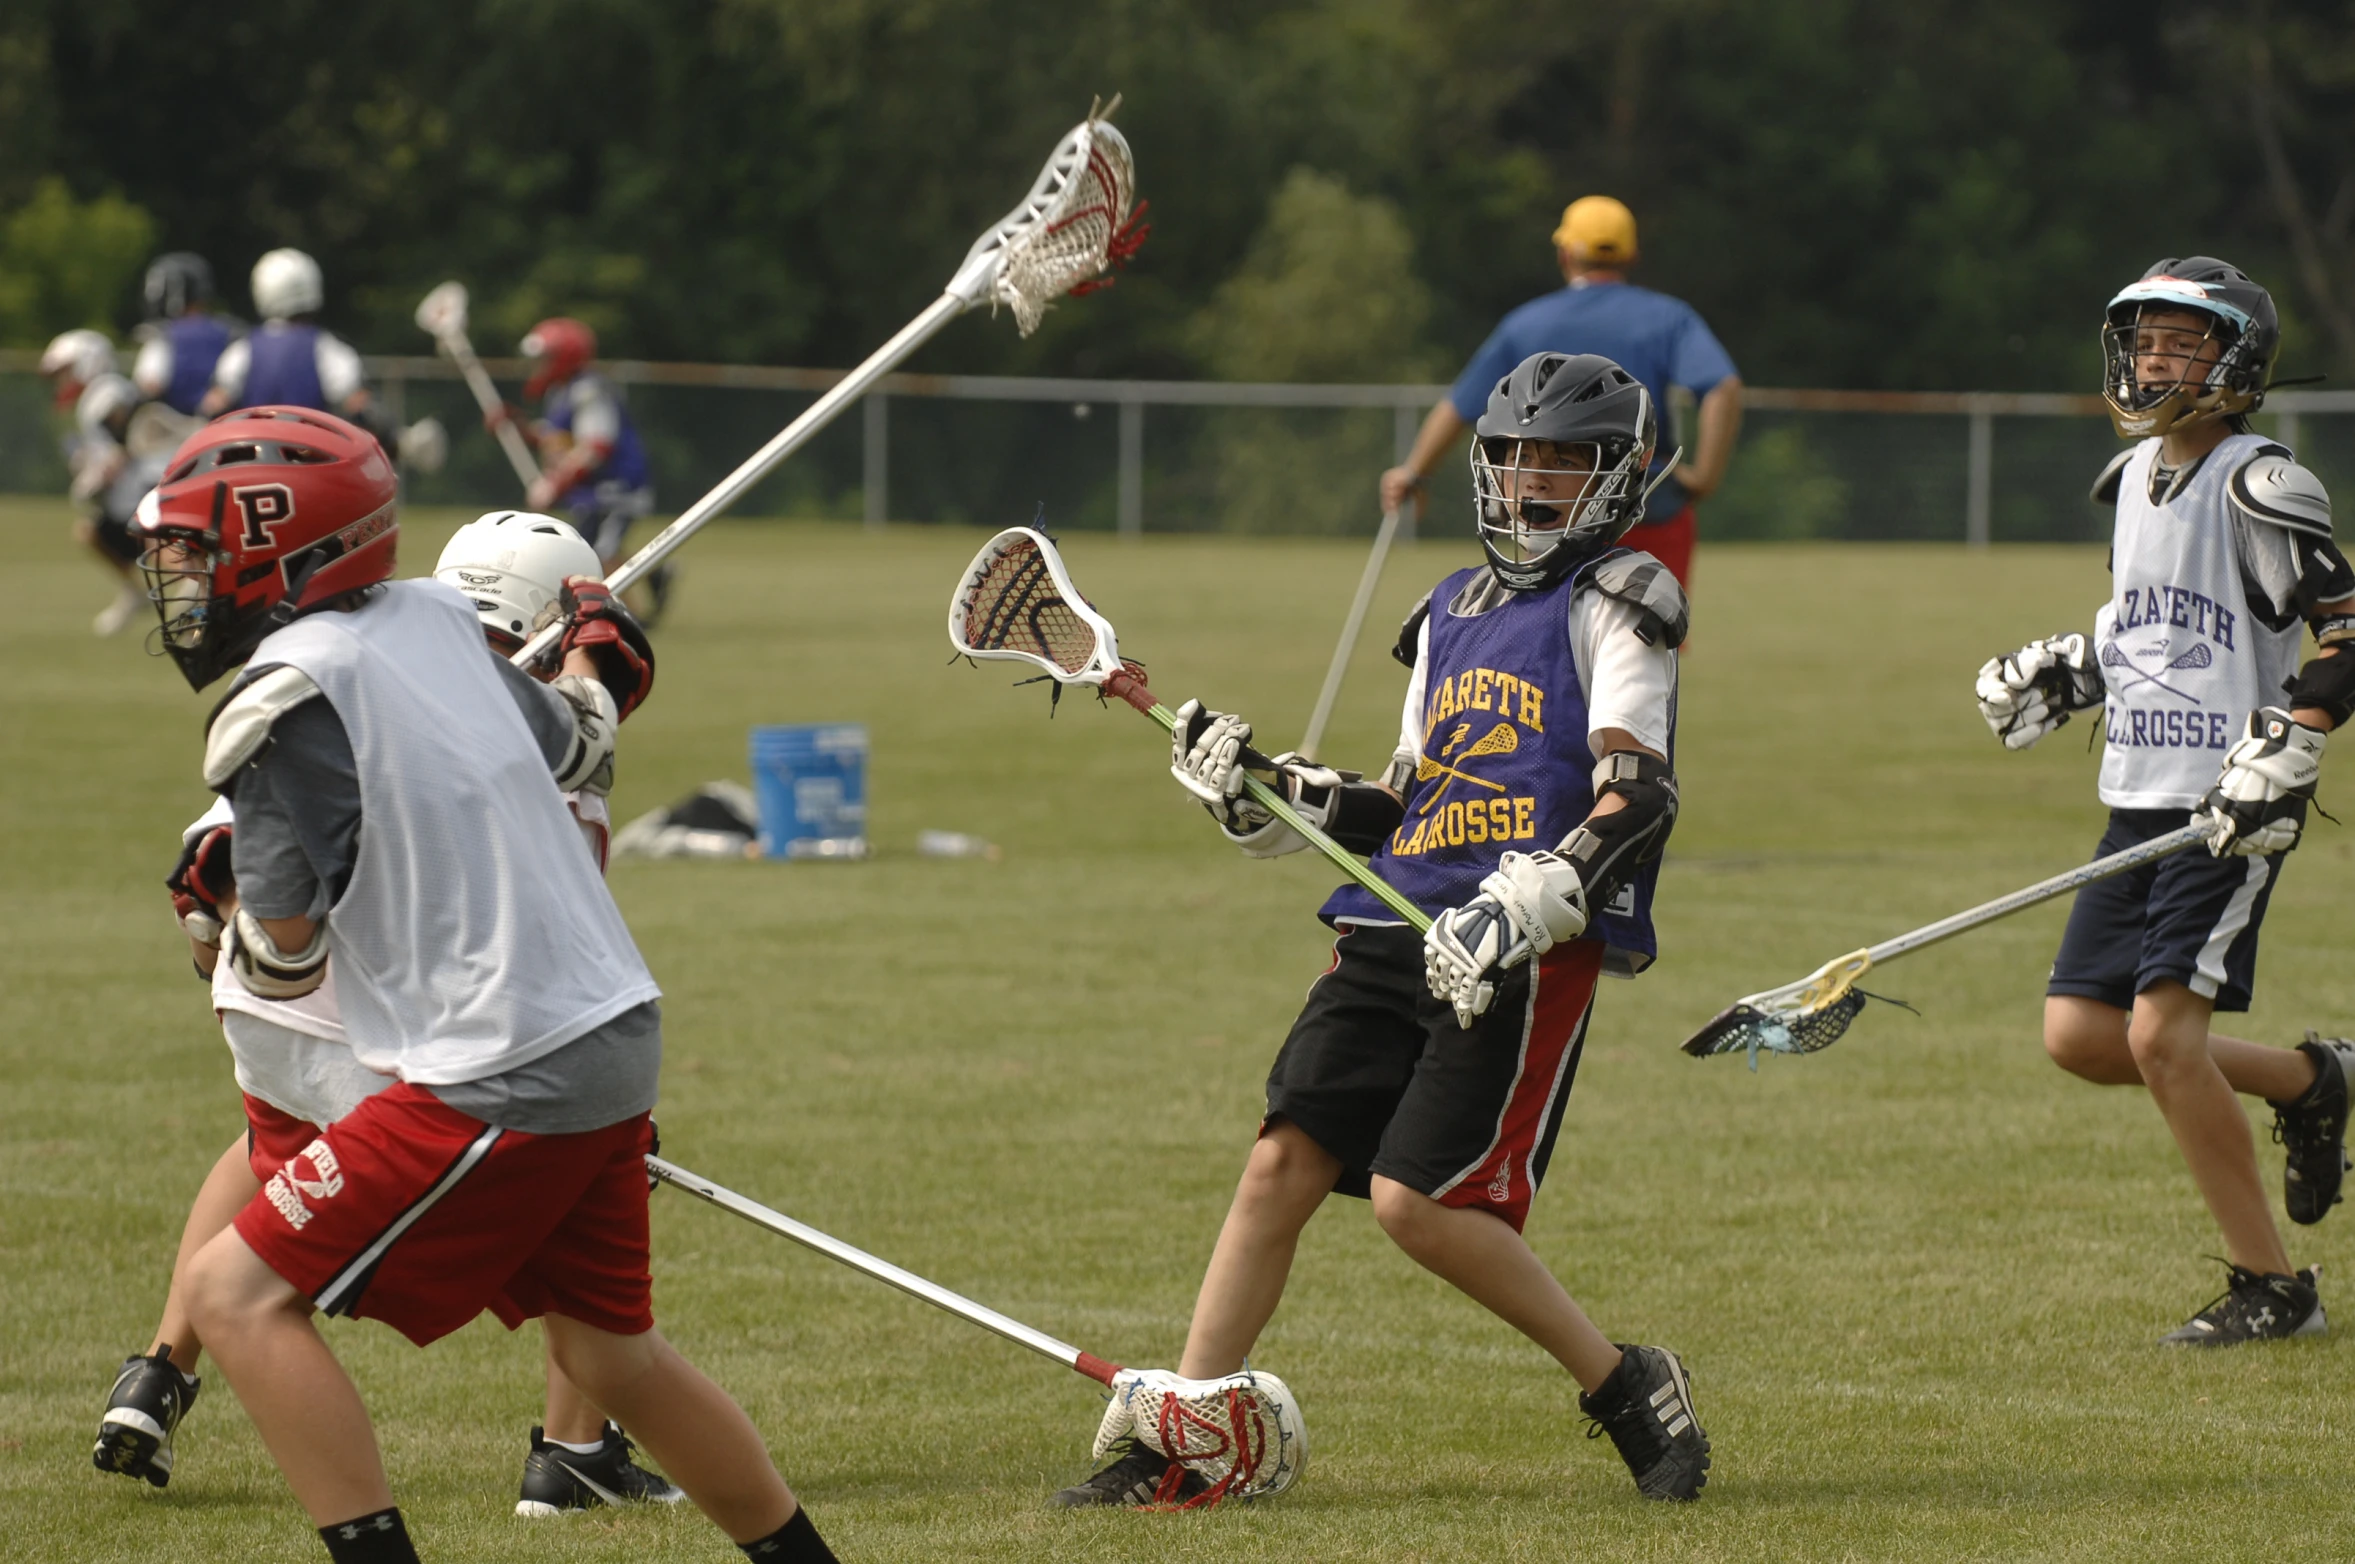 a group of s playing a game of lacrosse